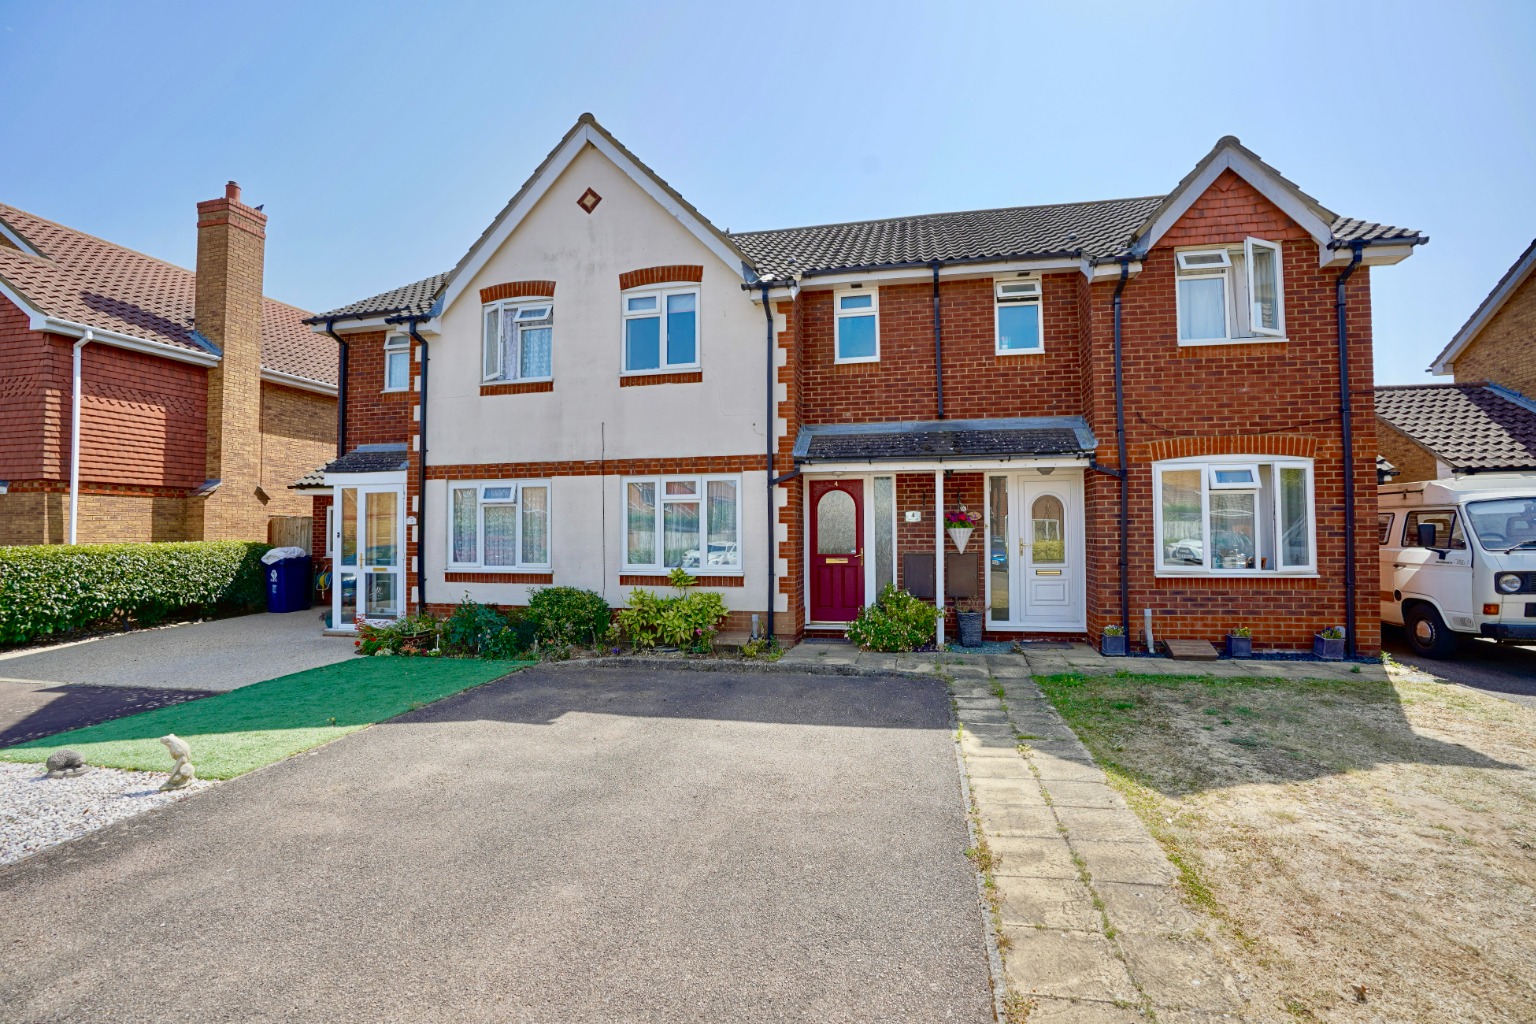 3 bed terraced house for sale in Ash Court, Huntingdon, PE28